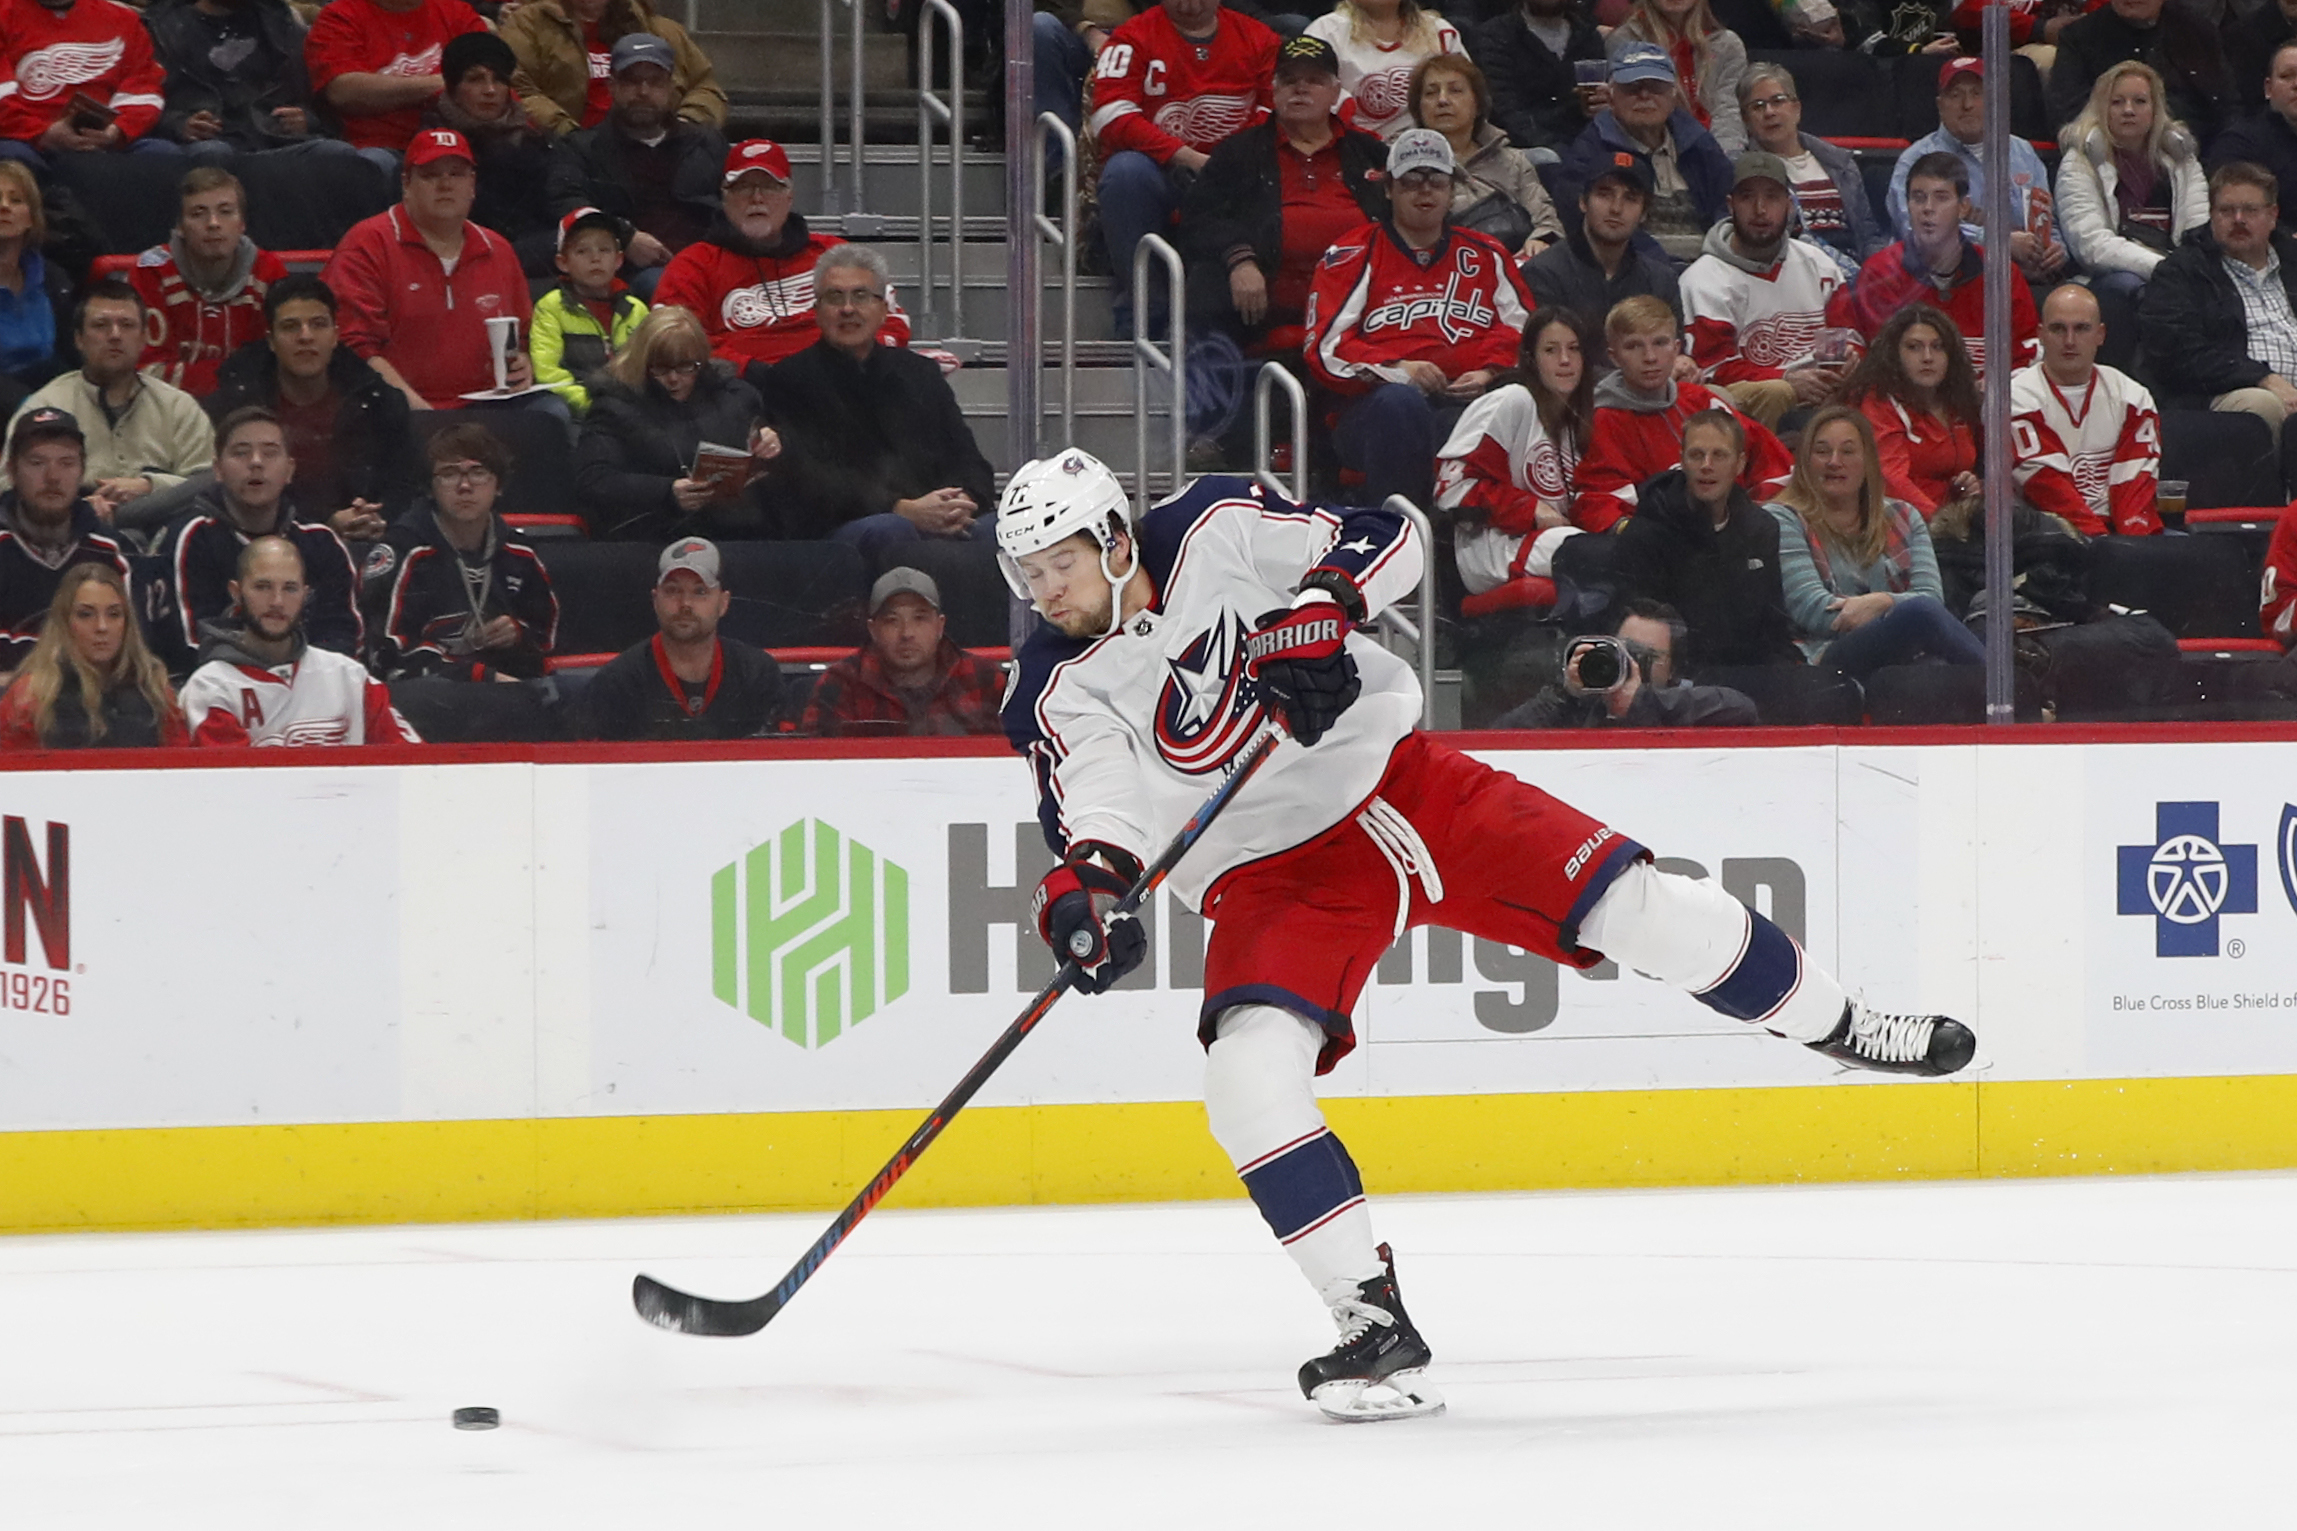 Blue Jackets start strong, end with 7-5 win over Red Wings